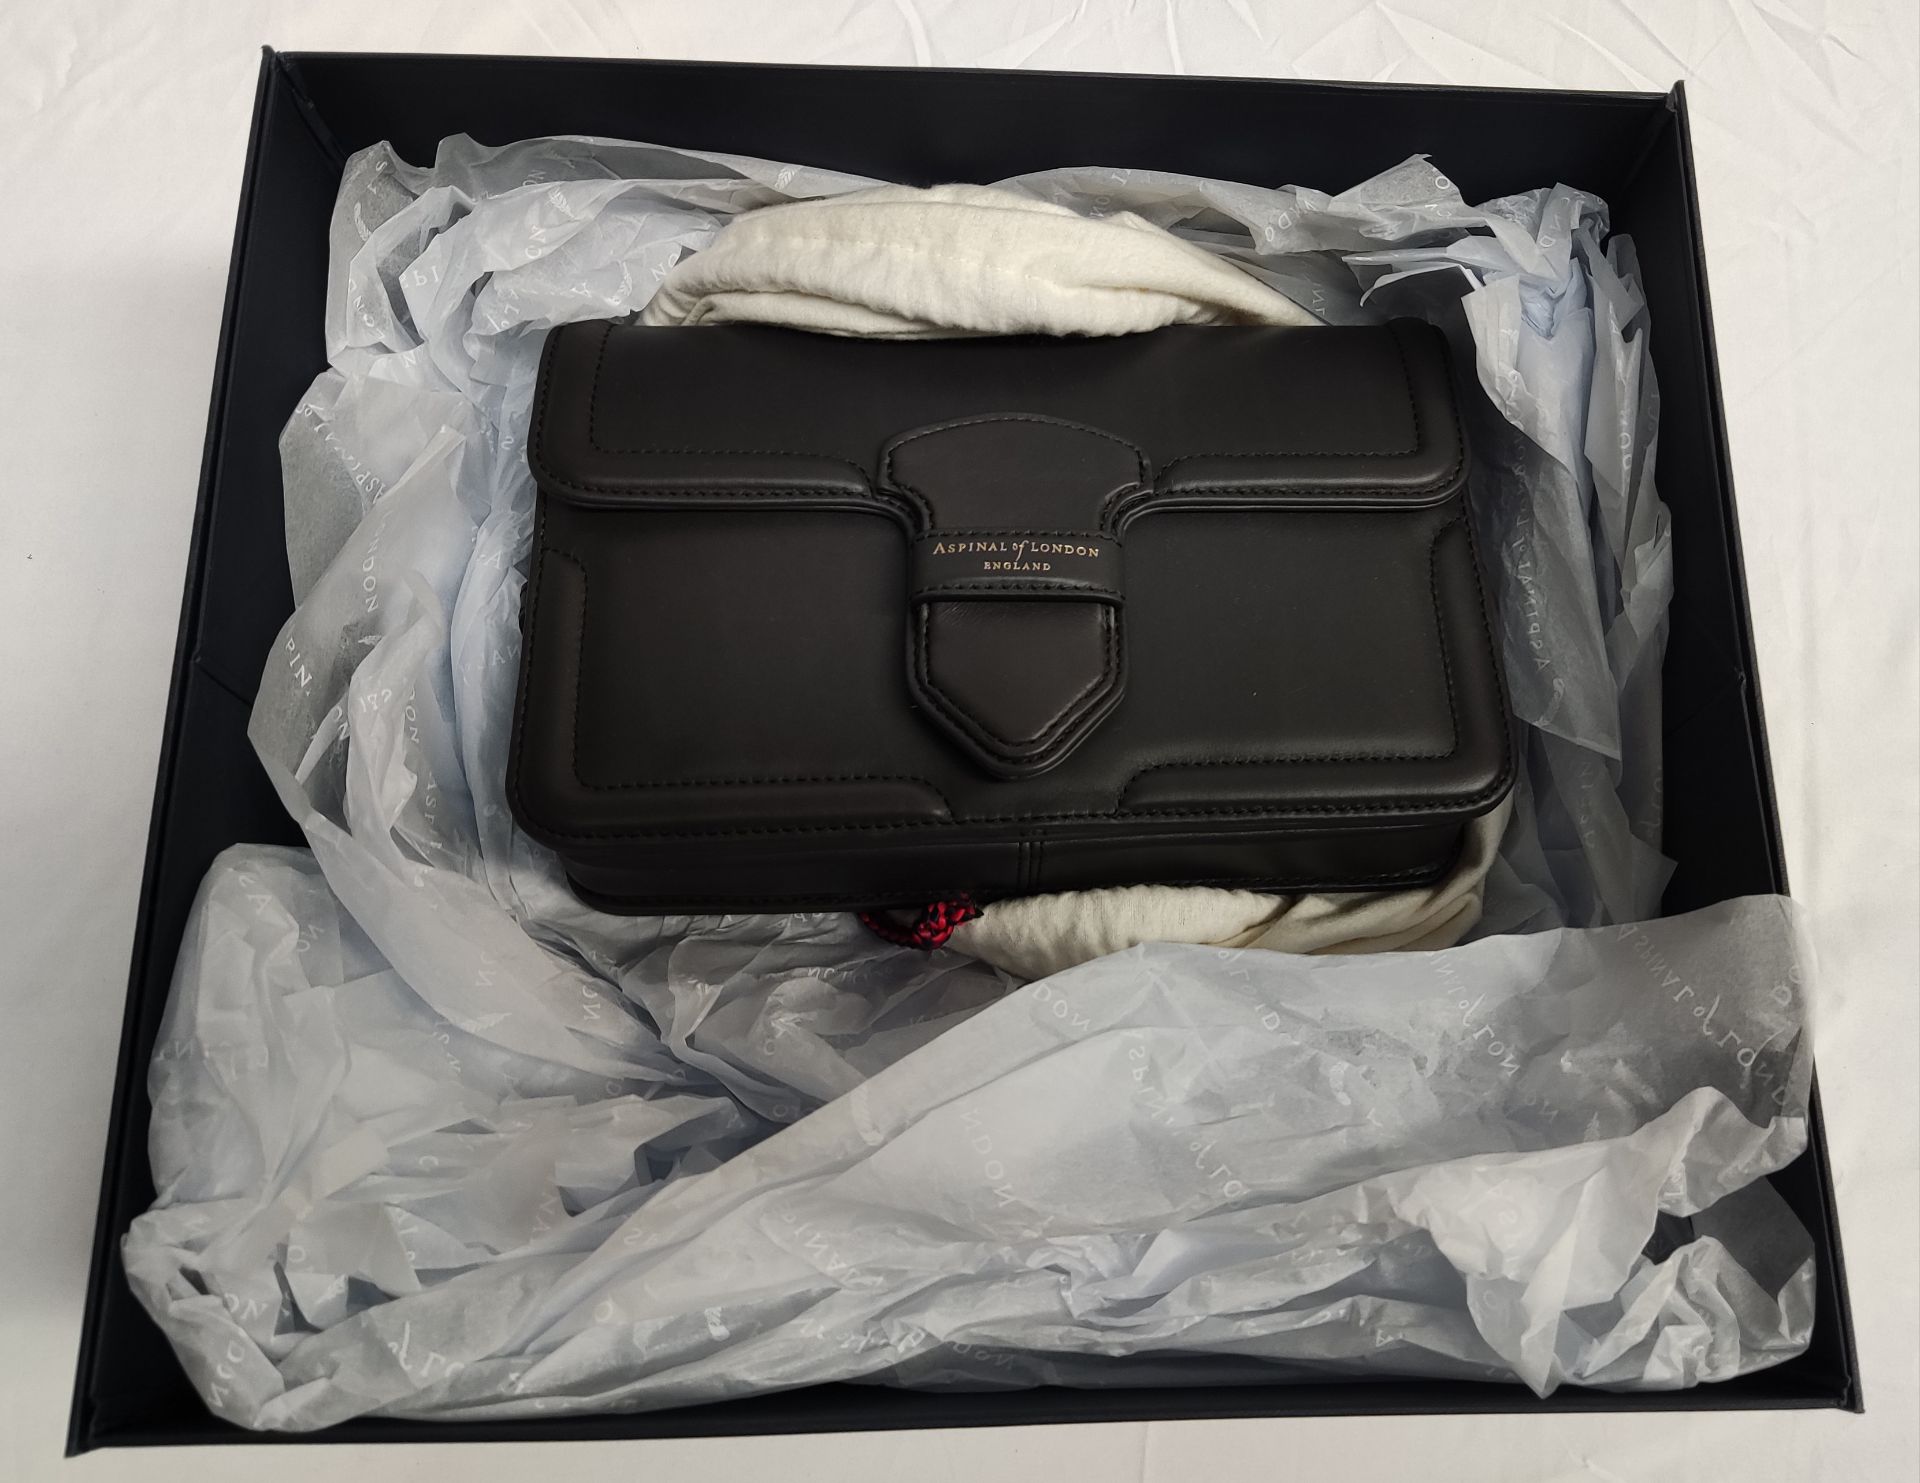 1 x ASPINAL OF LONDON The Resort Leather Bag In Smooth Black - Boxed - Original RRP £525 - Ref: - Image 12 of 24